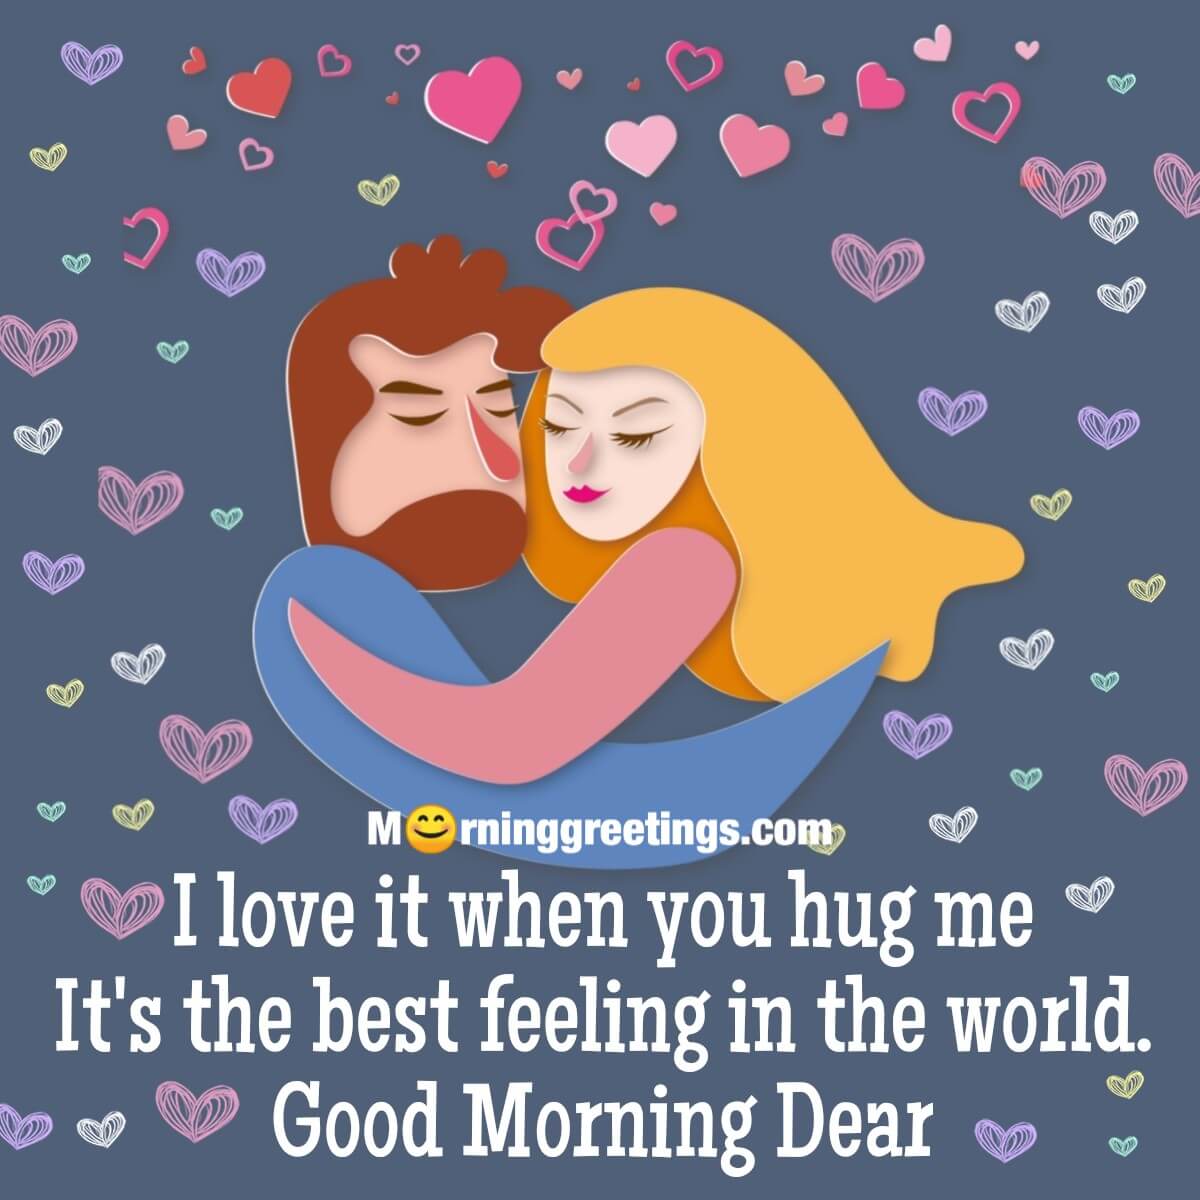 20 Good Morning Hug Quotes And Messages Cards.